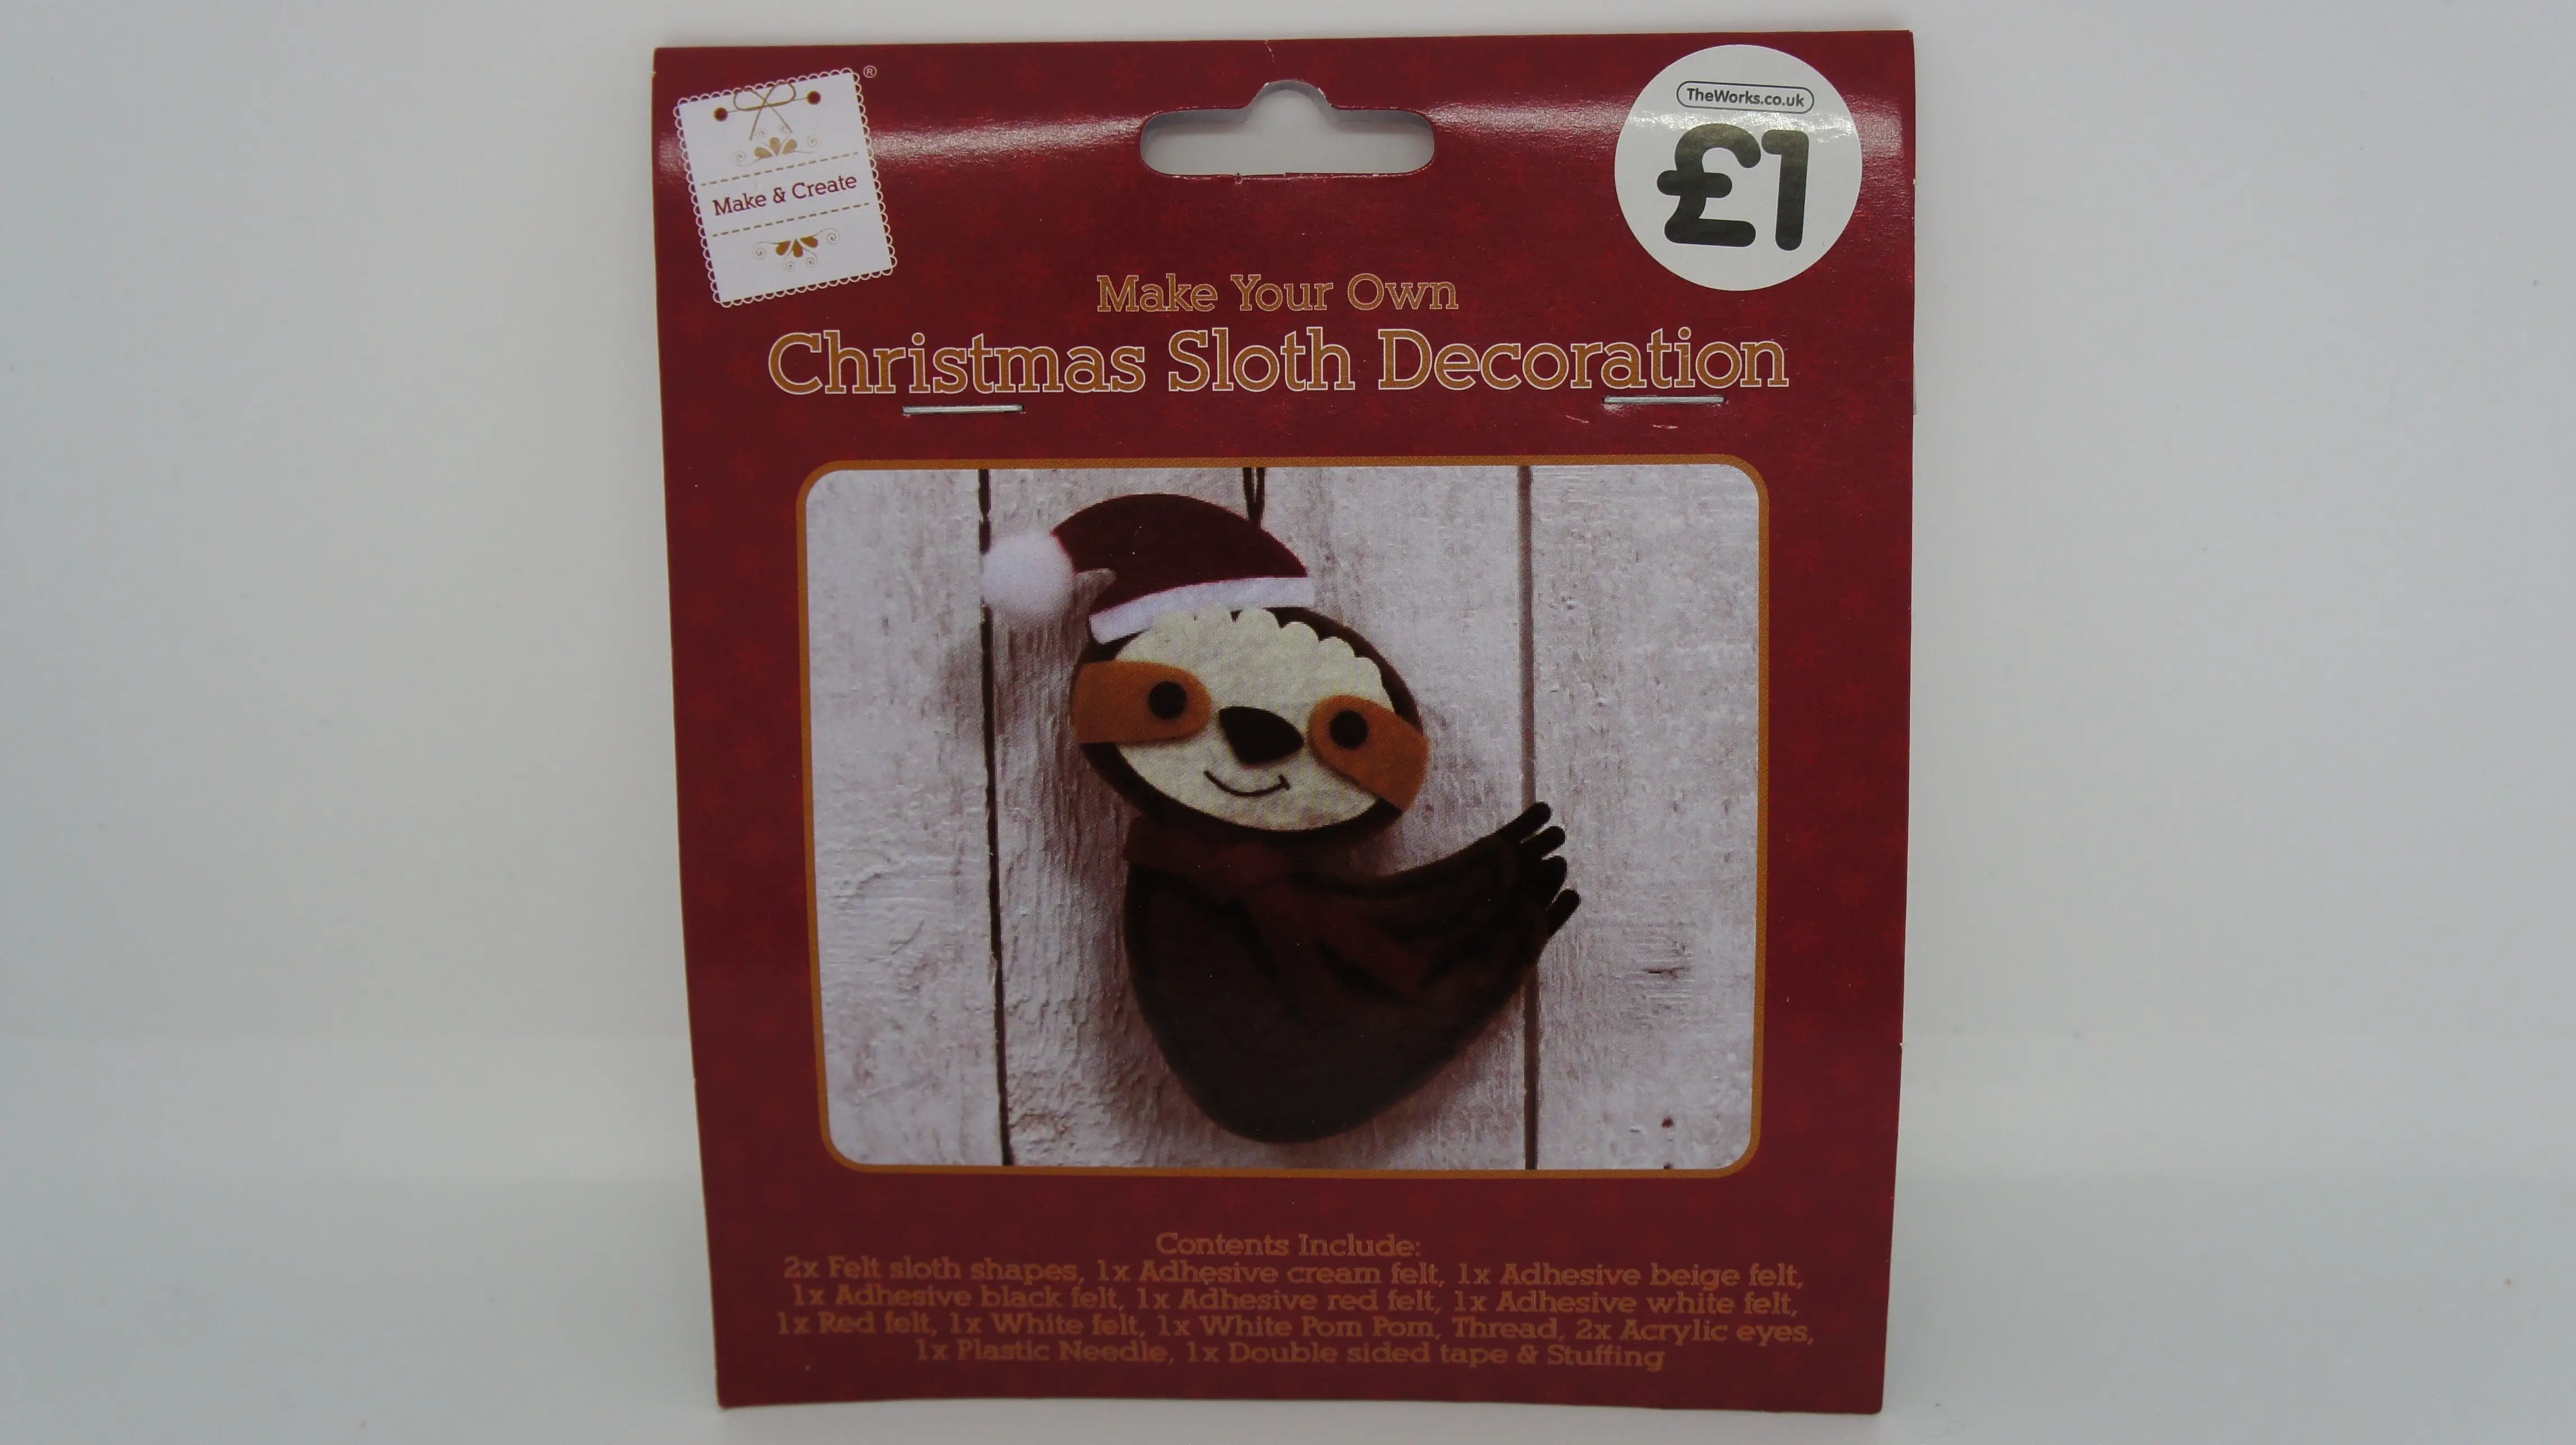 Christmas Sloth Decoration packet